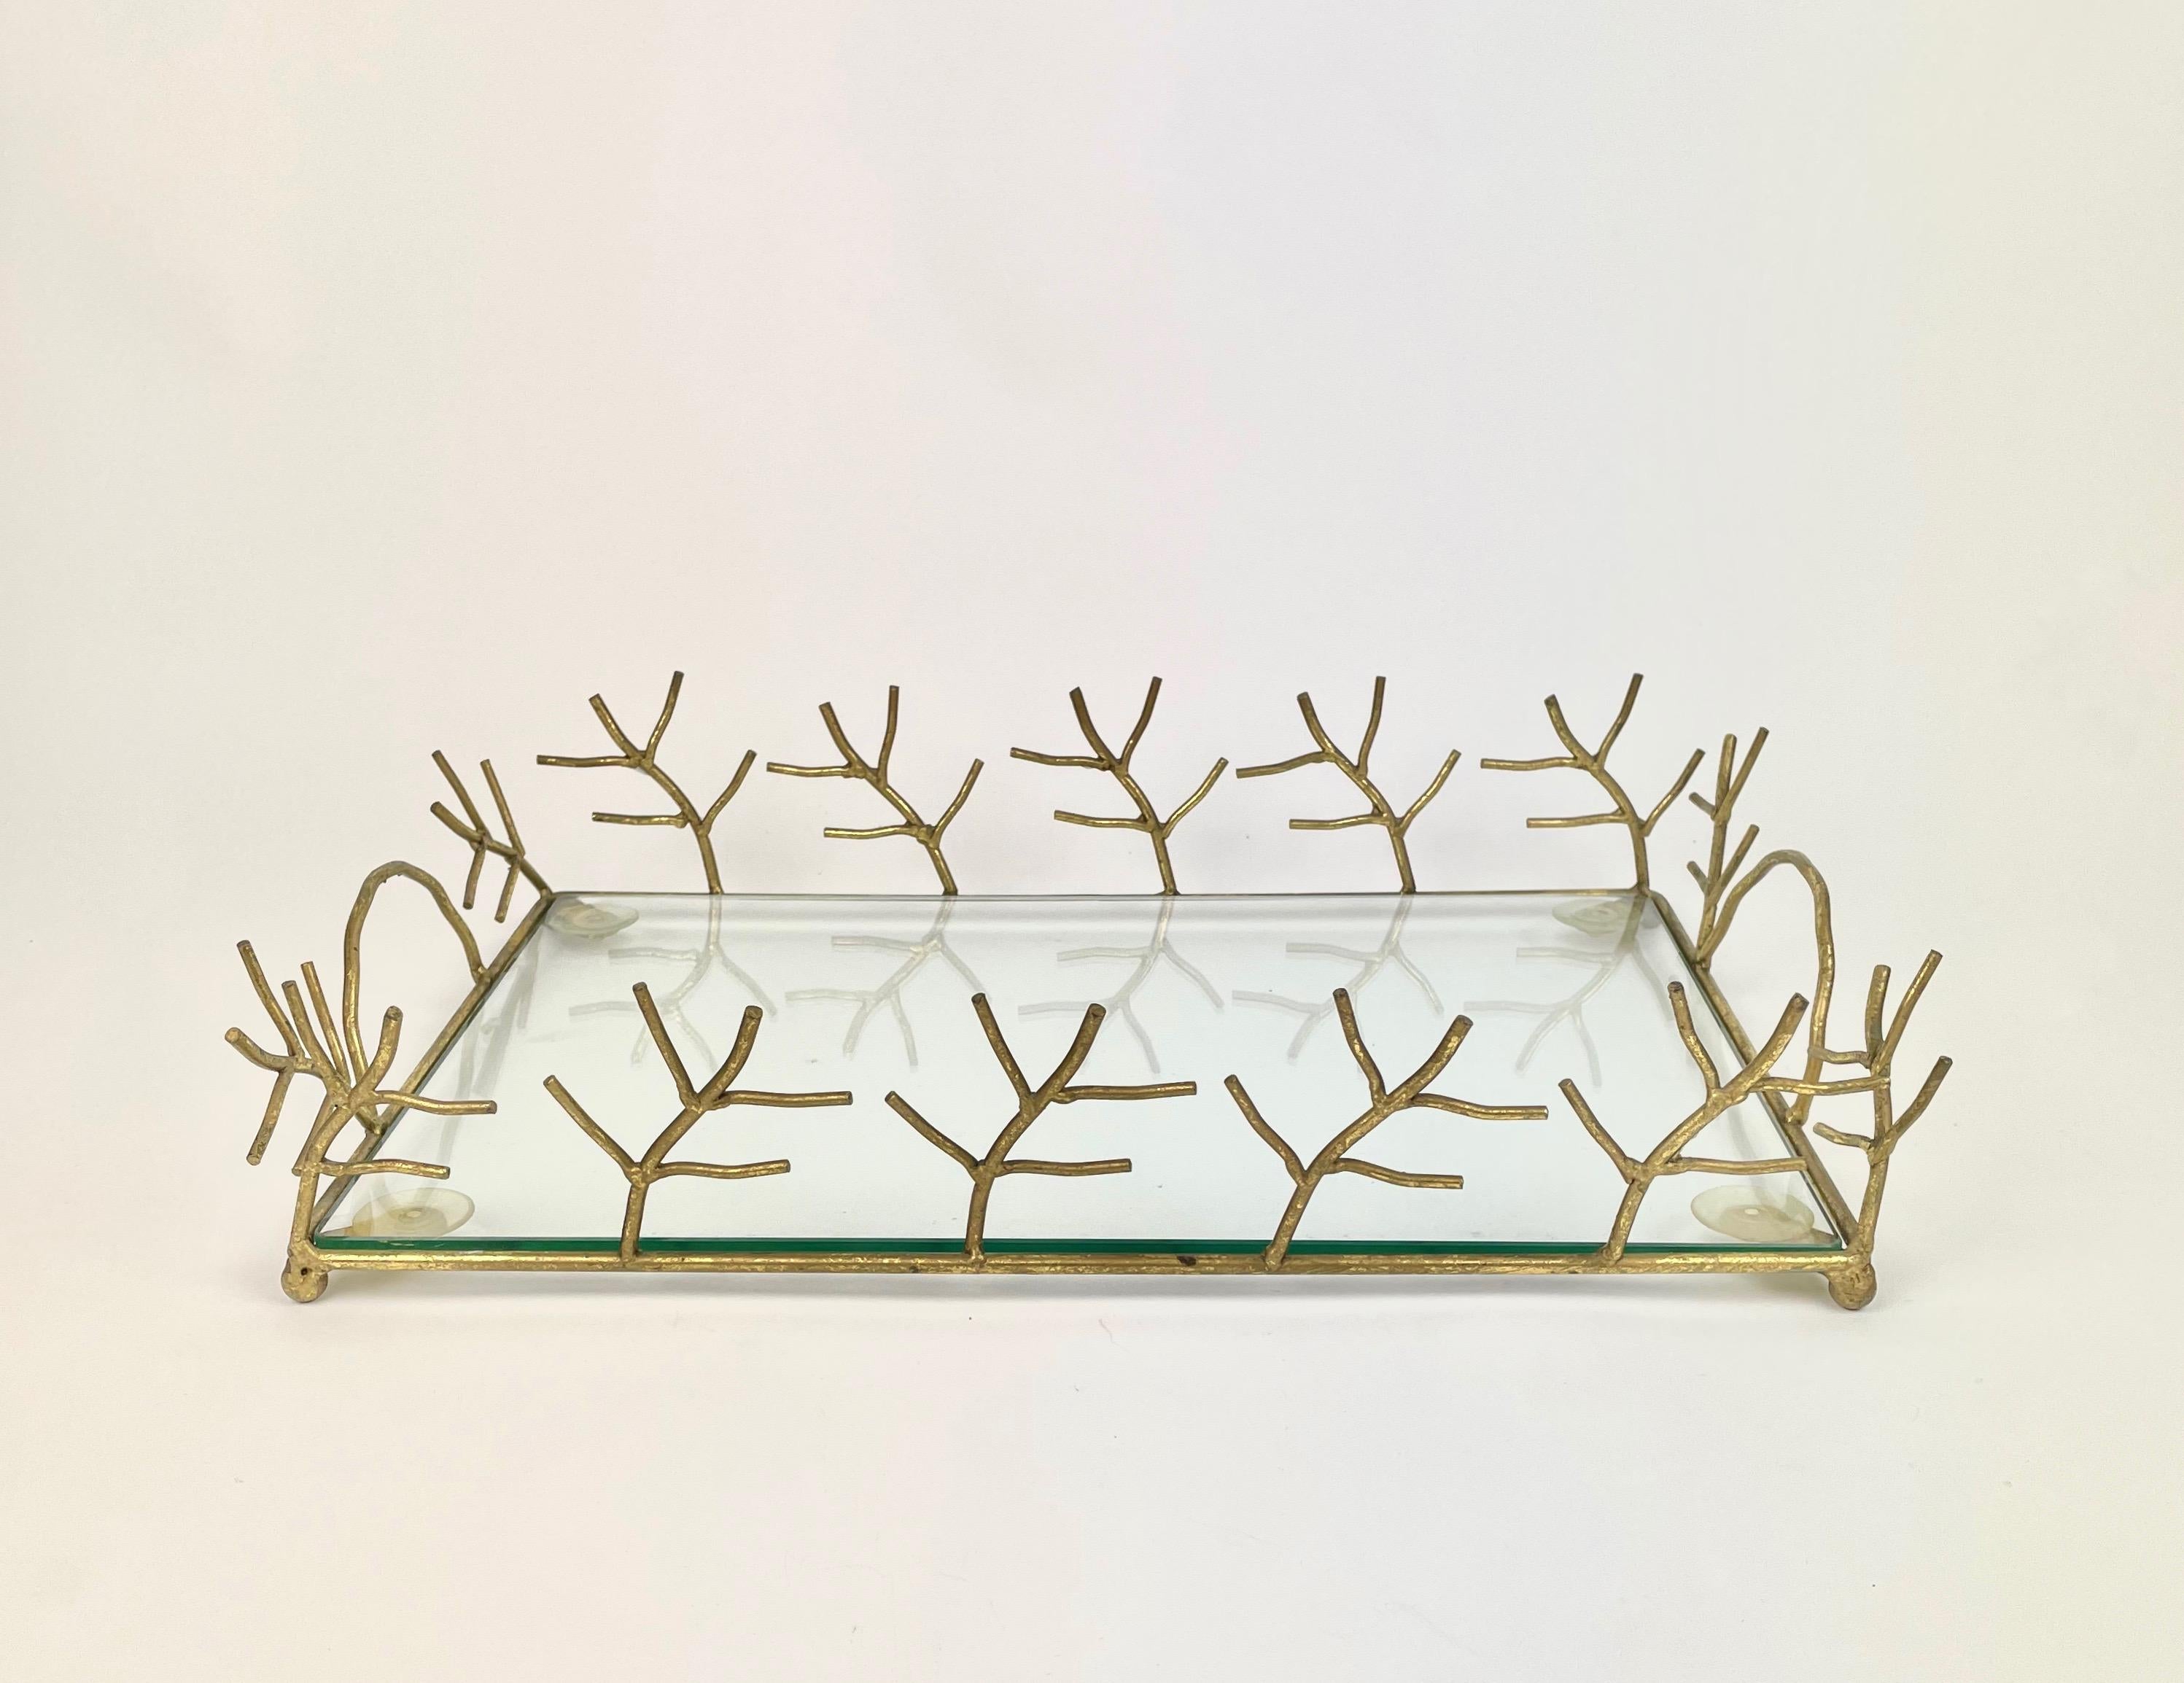 Elegant serving tray in Maison Baguès style with animated branches decoration and handles in golden metal and glass shelf. Made in France in the 1970s.